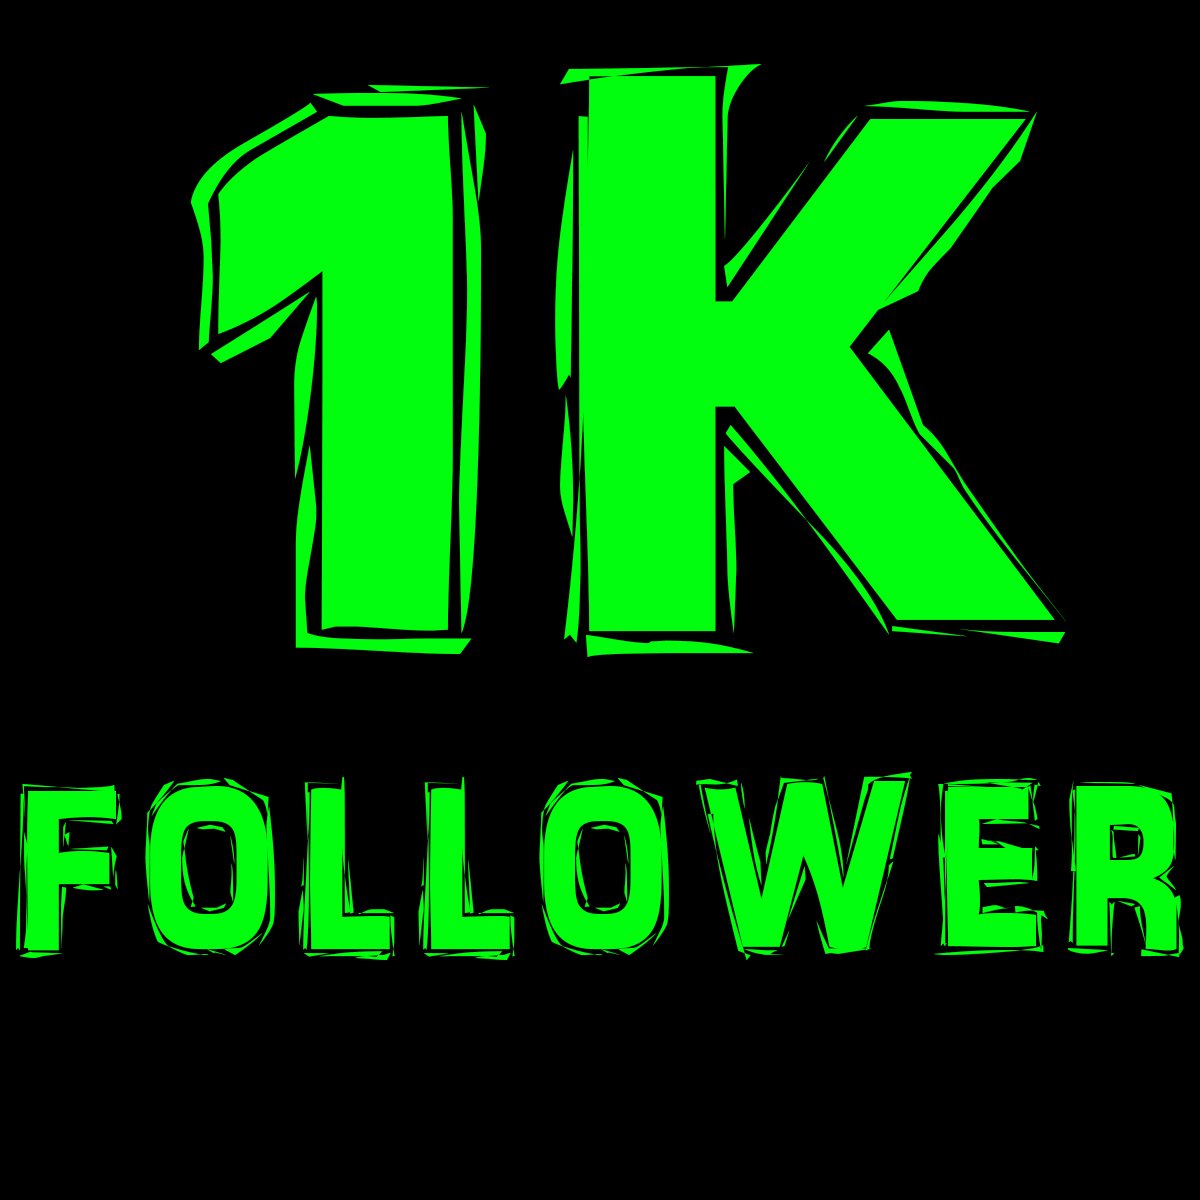 If you FOLLOW me i will FOLLOW you back, this is a 100% #followforfollow account, once i reach 1K followers i will aim for 10K then 100K! help me reach my goal!